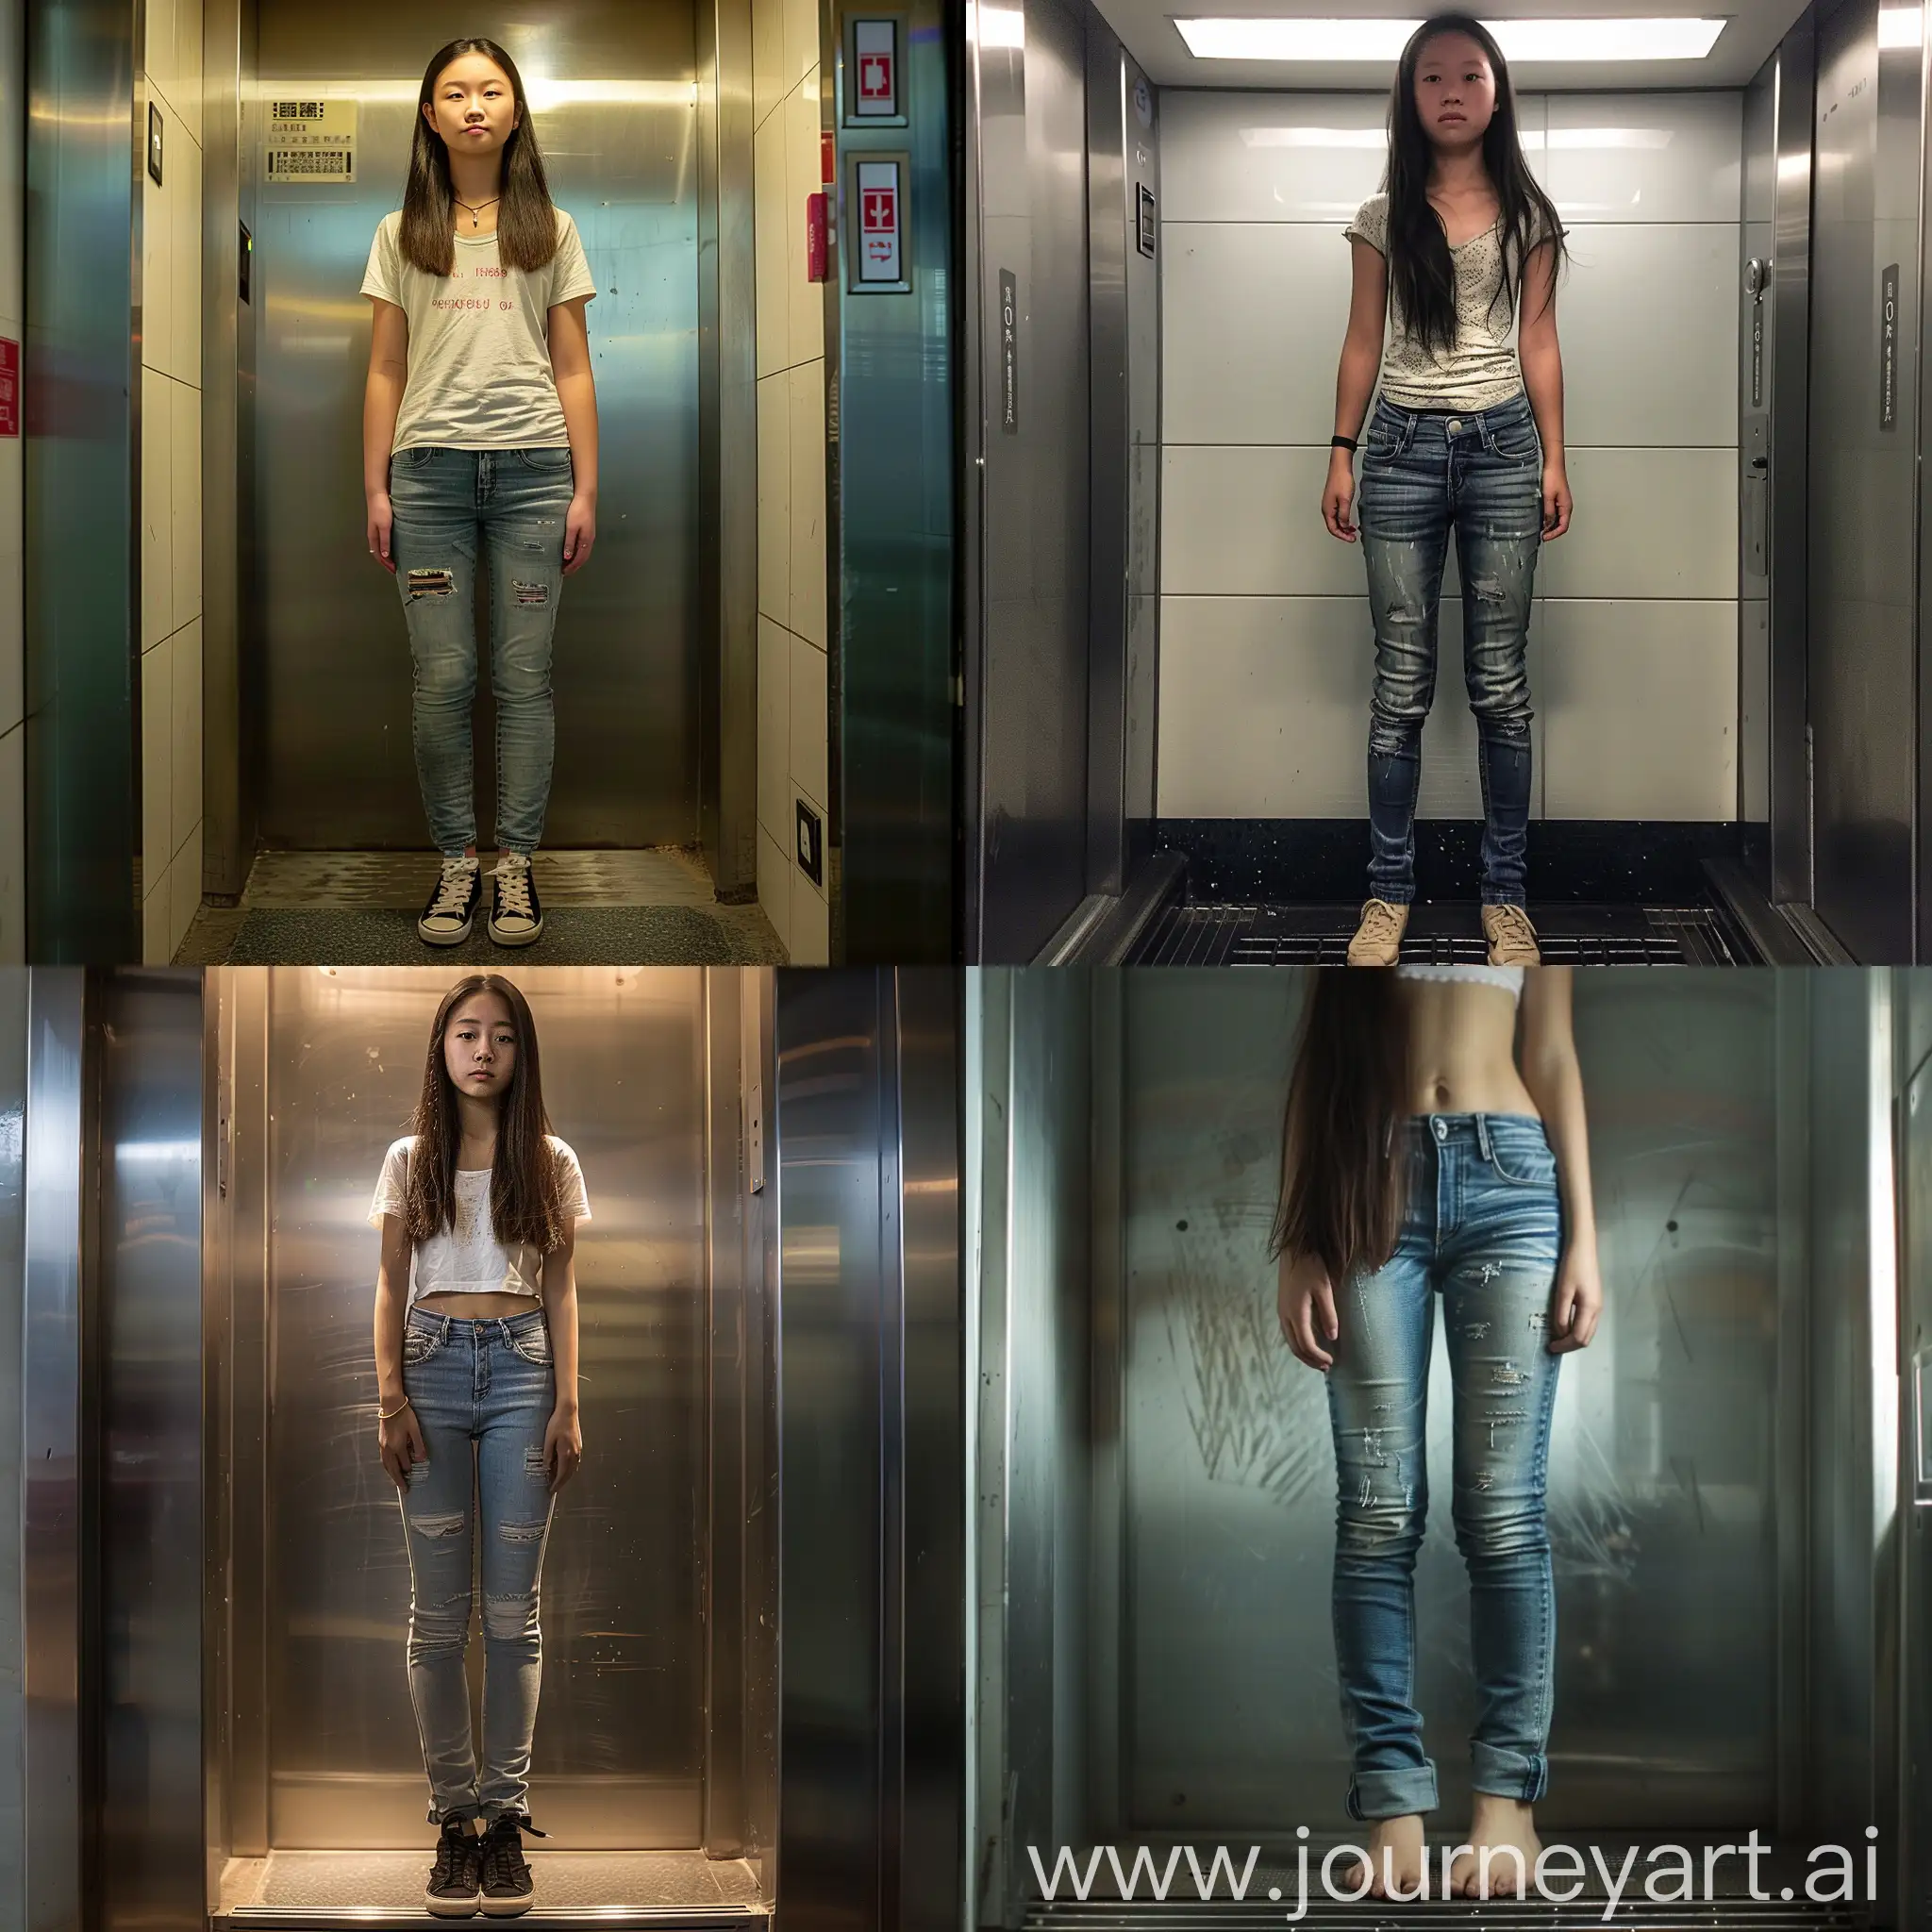 A 15-year-old Chinese girl in skinny jeans, standing in an elevator